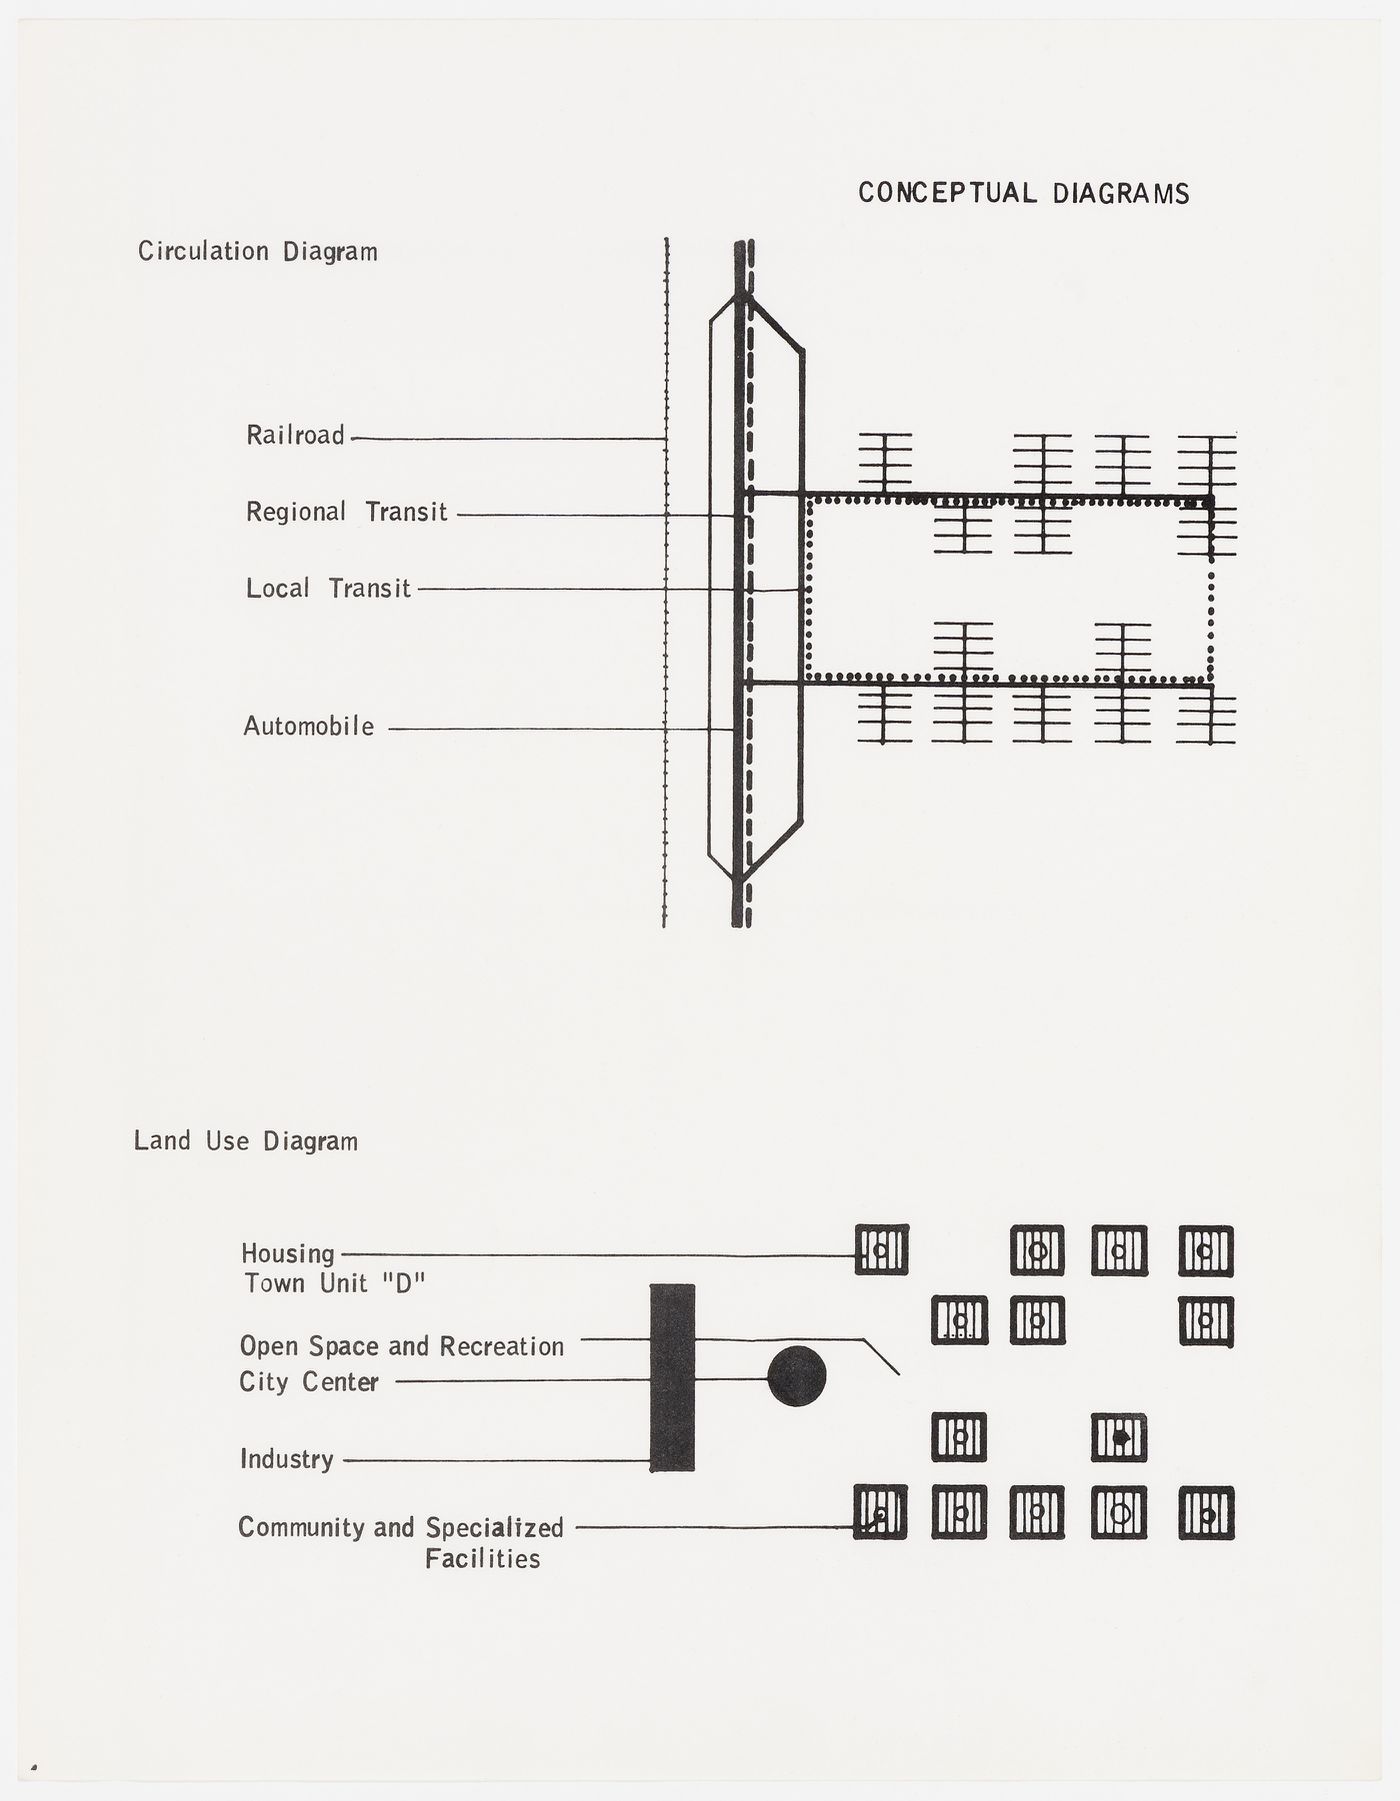 Atomia: conceptual diagrams illustrating circulation and land use (document from the Atom project records)